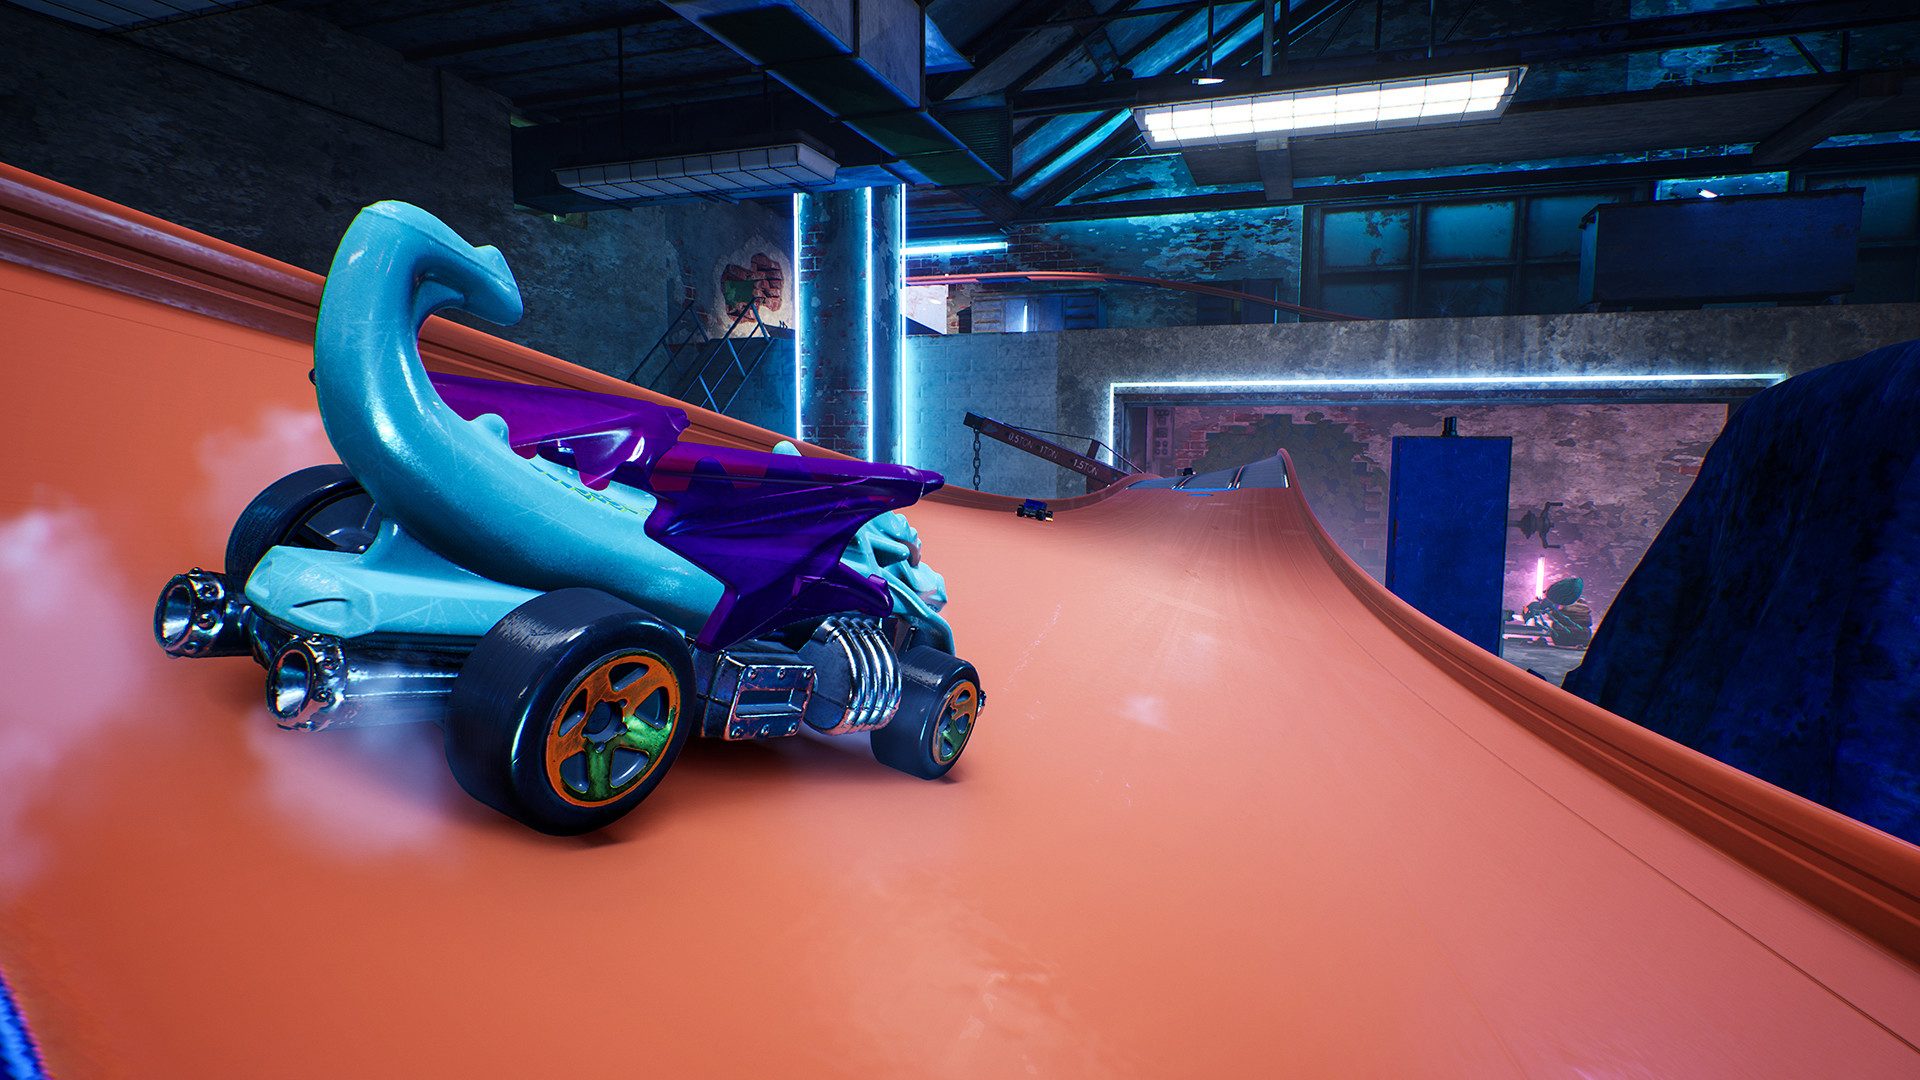 free download hot wheels unleashed ™